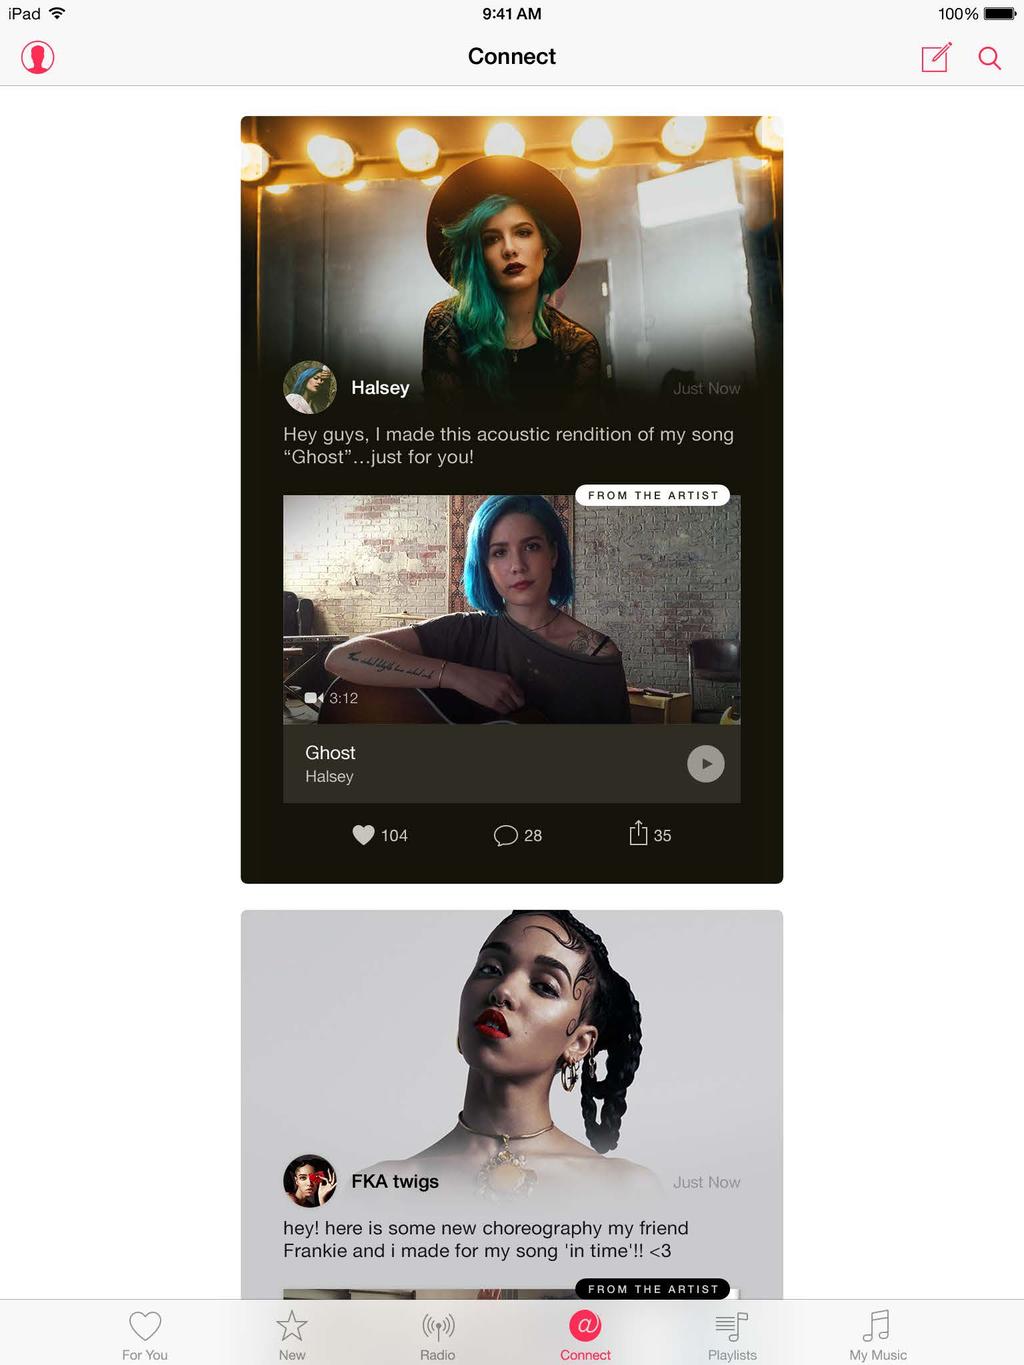 Connect Even if you re not an Apple Music member you can follow your favorite artists, learn more about them, read their recent posts, and comment on what you find.